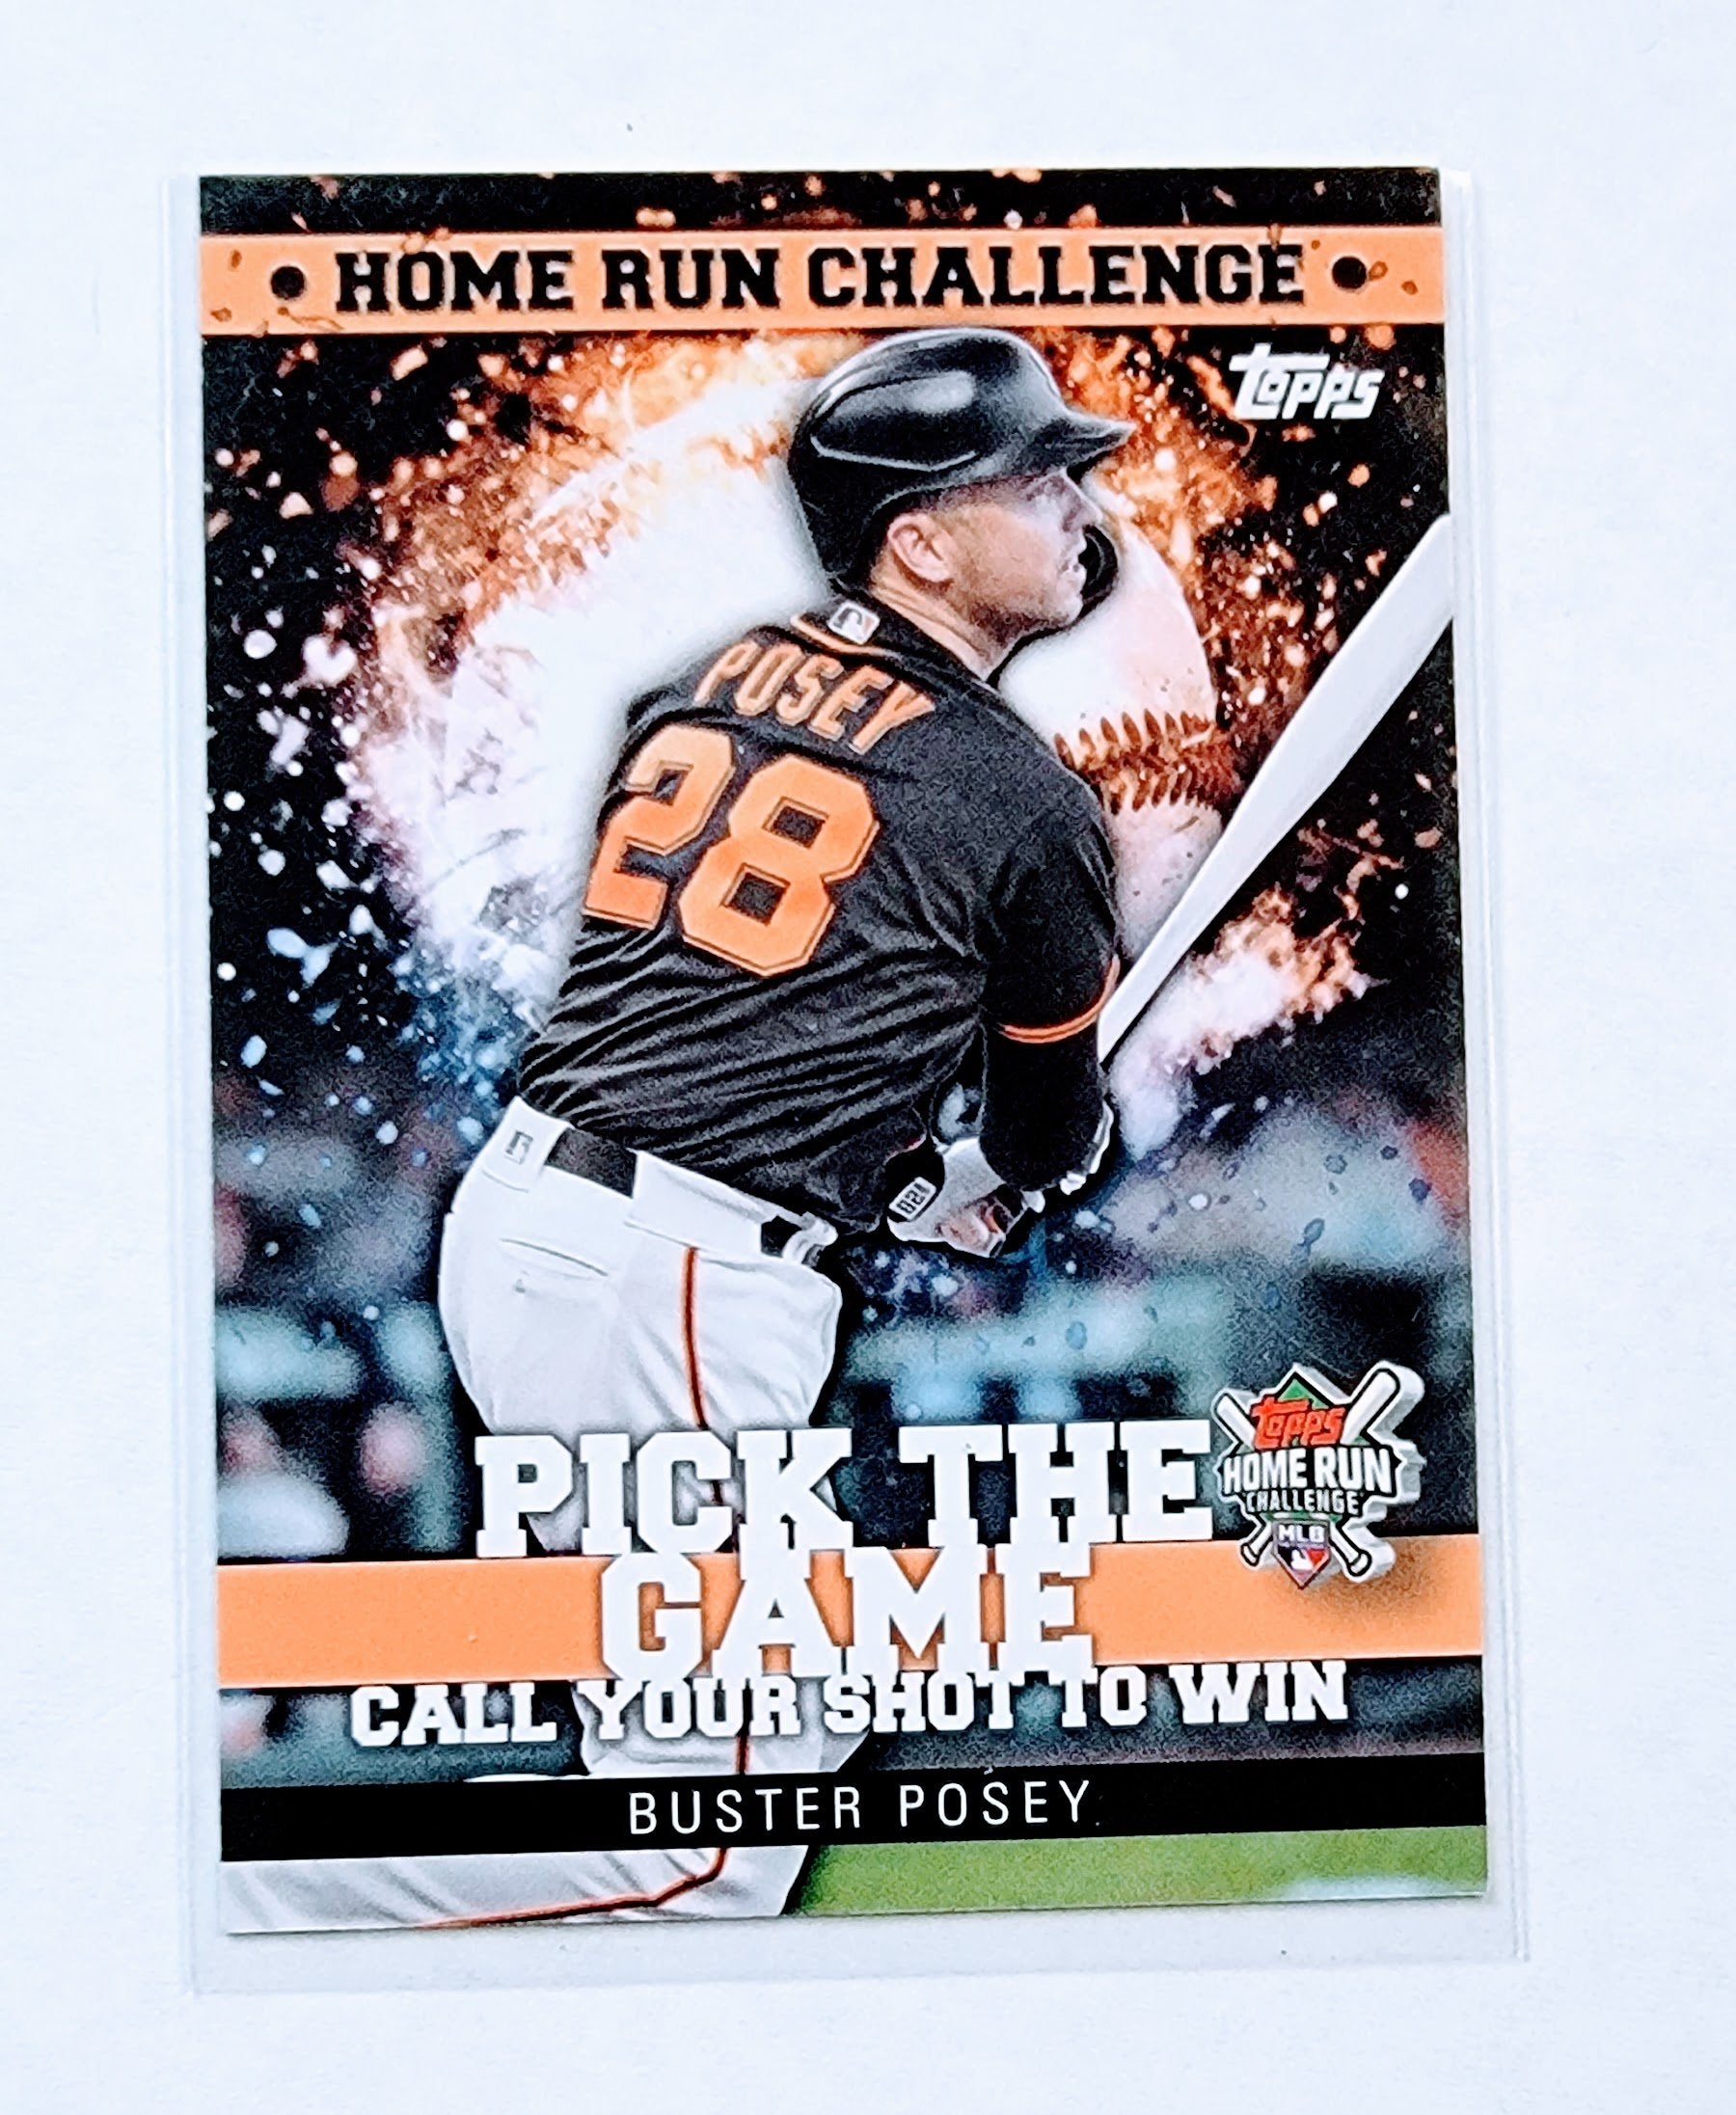 2022 Topps Buster Posey Homerun Challenge Promo Baseball Card 'Scratched' AVM1 simple Xclusive Collectibles   